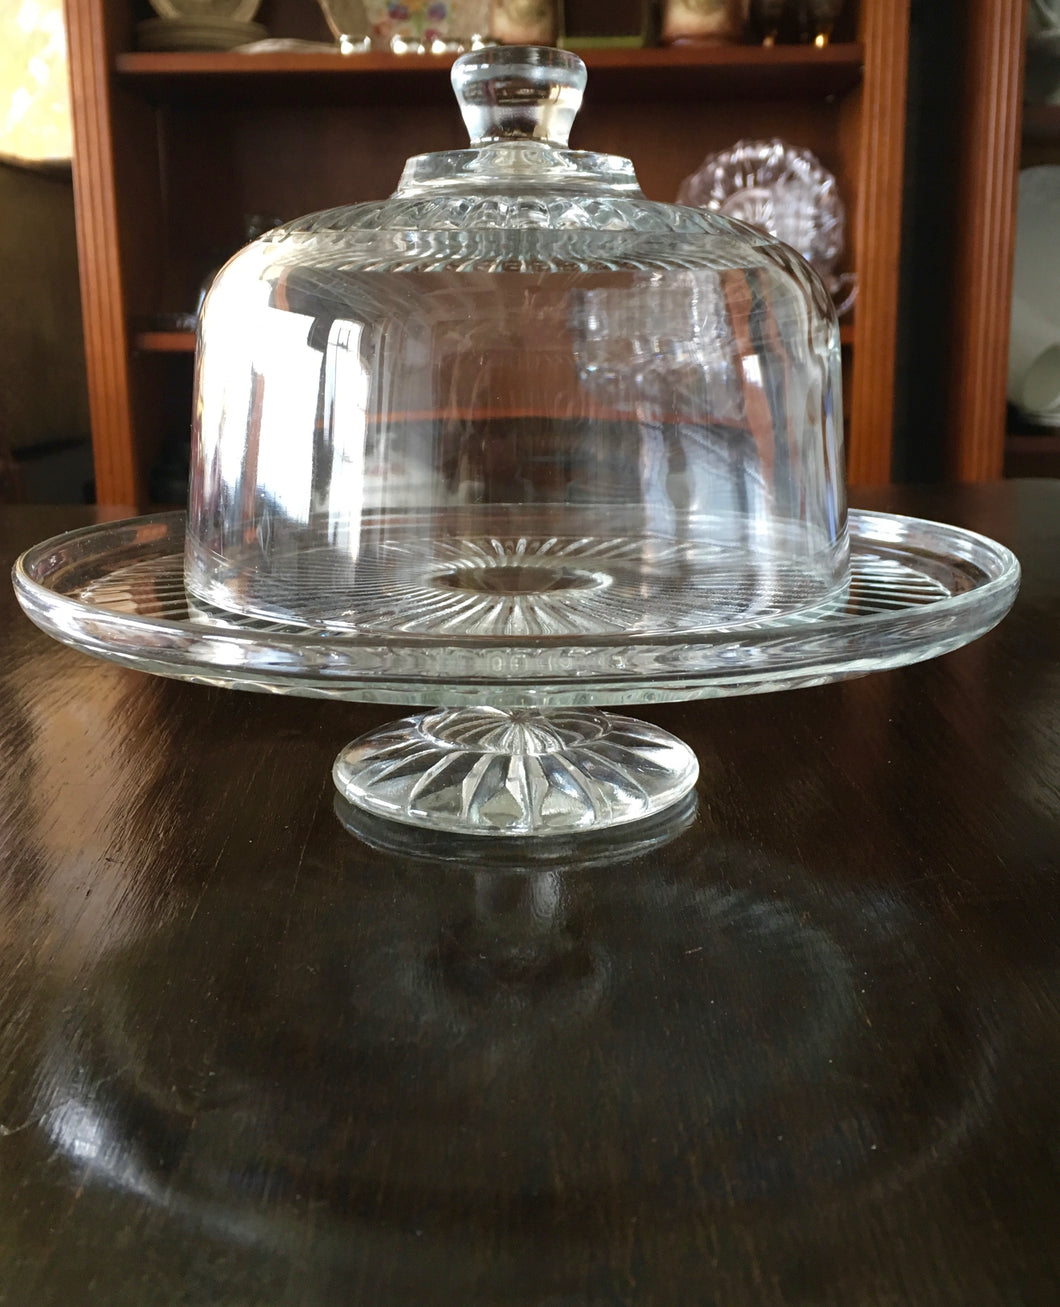 19th Century Tazza with Glass Dome